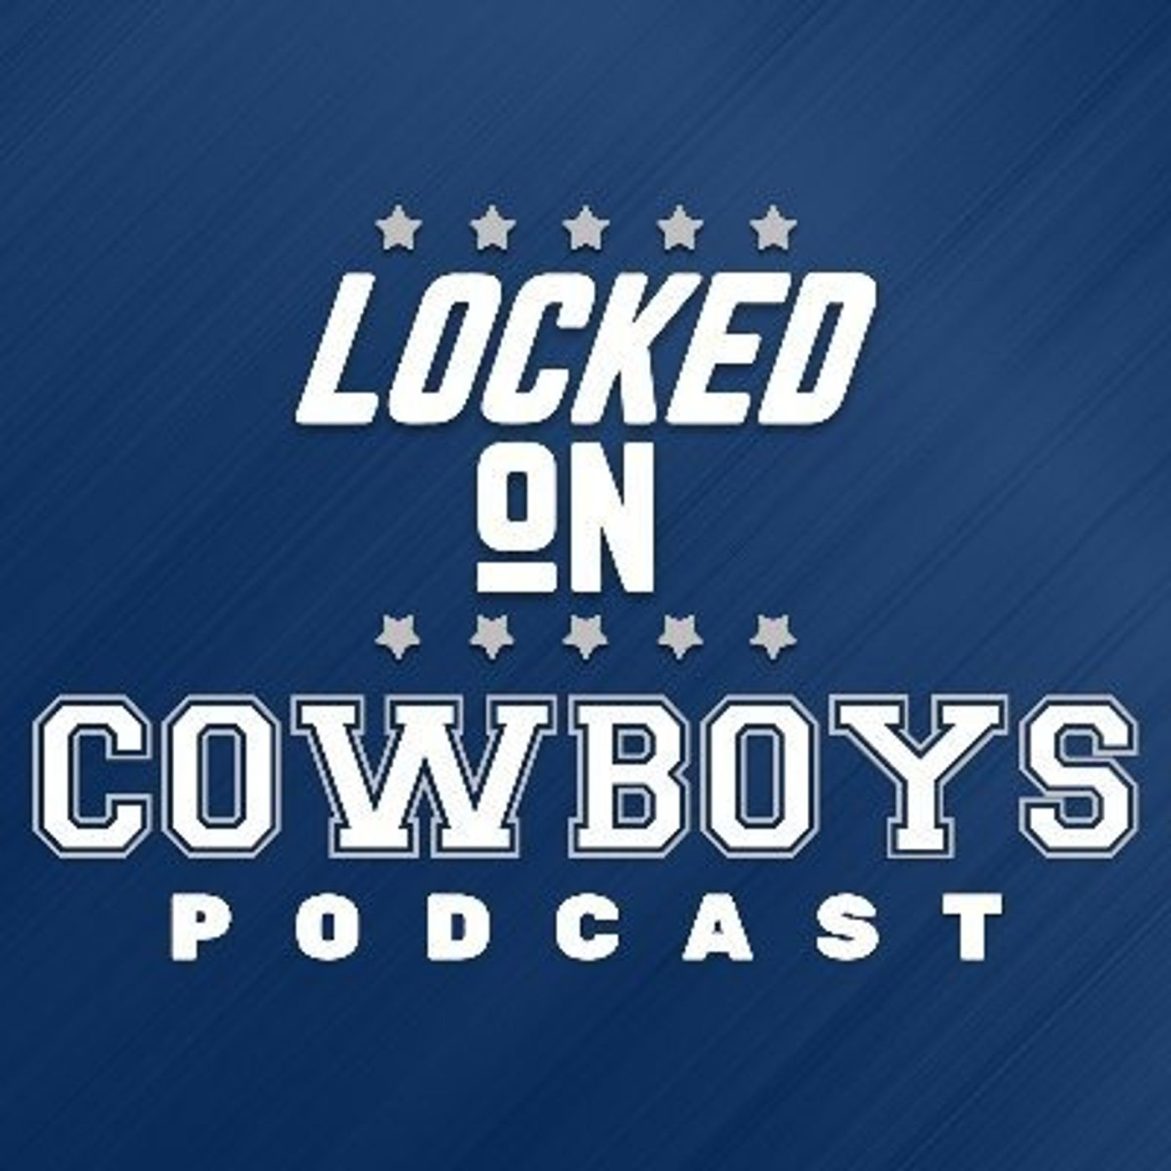 Black Podcasting - Three Surprise Picks The Dallas Cowboys Could Make On Day 2 of NFL Draft!